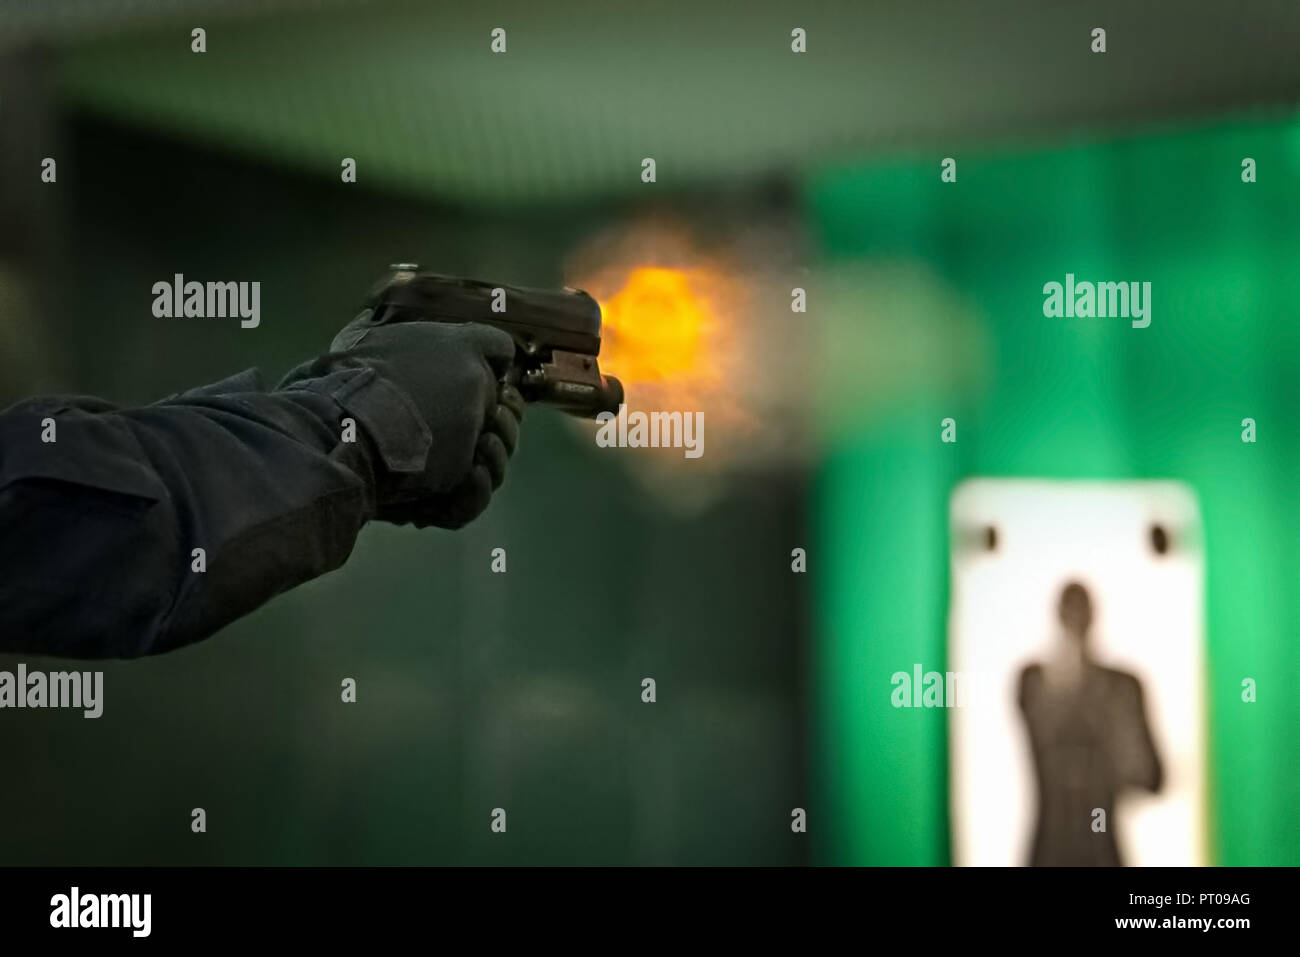 A man practices a polygon shooting at the silhouette, takes aim and shoots. Stock Photo